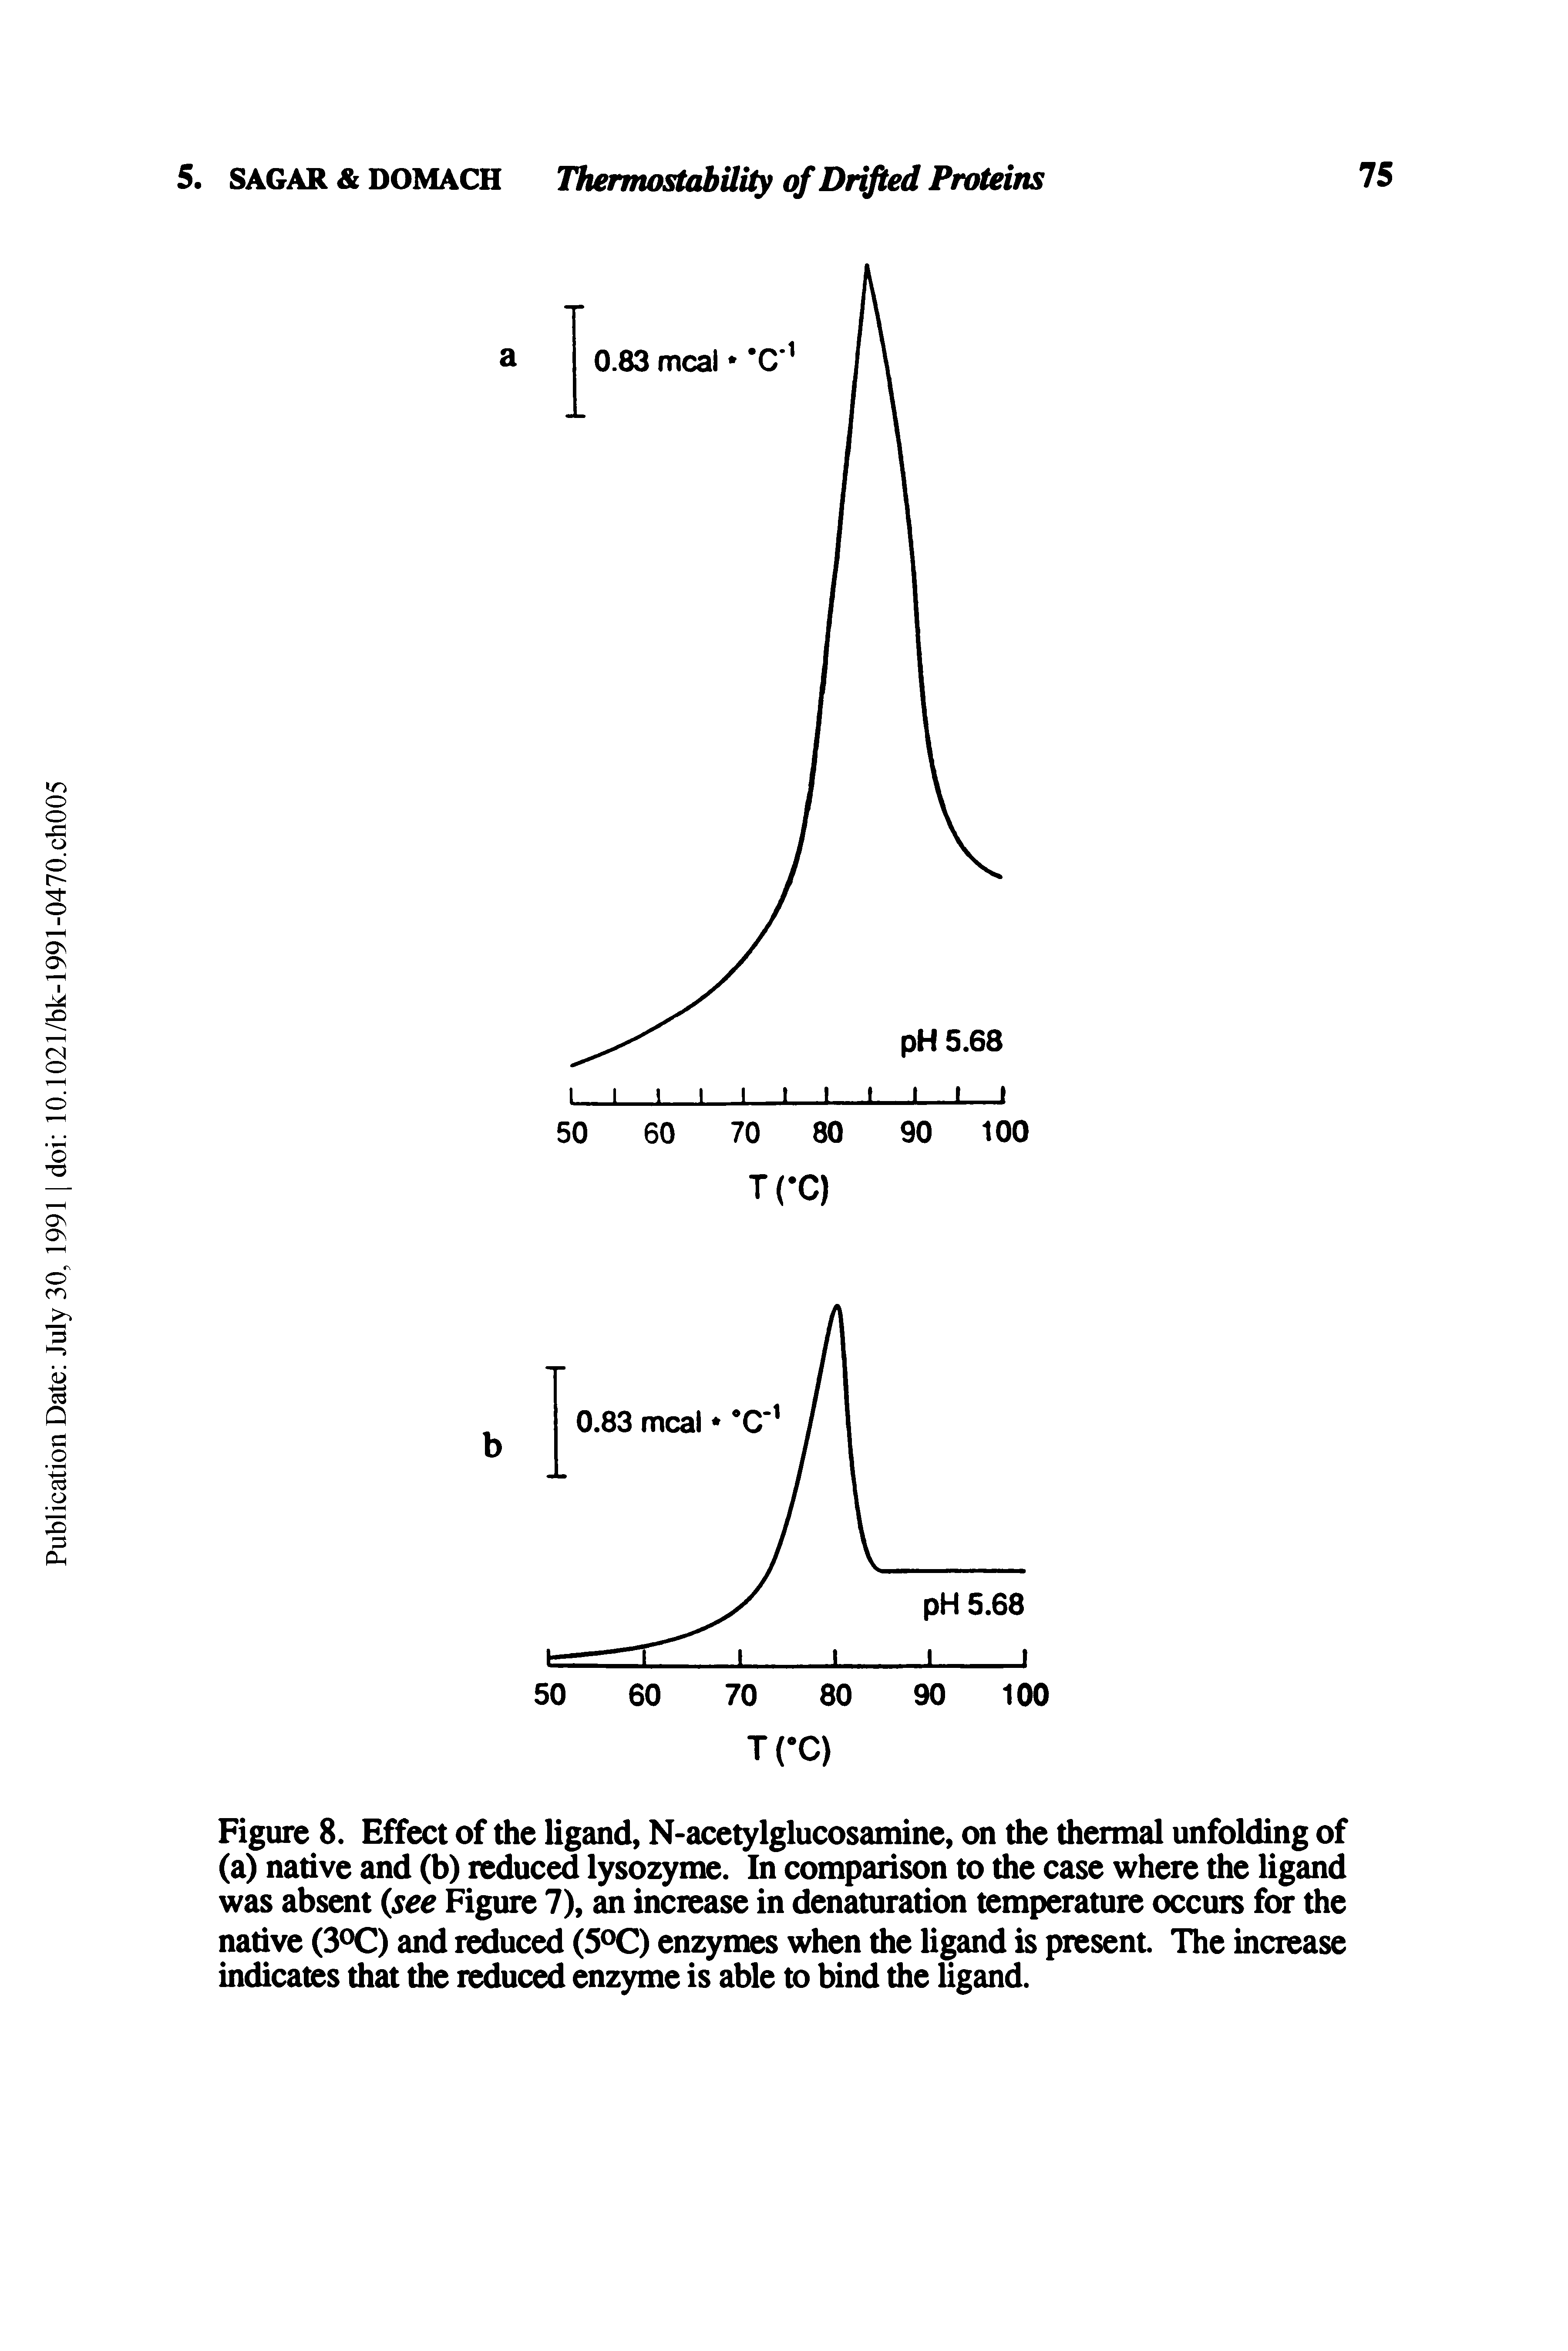 Figure 8. Effect of the ligand, N-acetylglucosamine, on the thermal unfolding of (a) native and (b) reduced lysozyme. In comparison to the case where the ligand was absent see Figure 7), an increase in denaturation temperature occurs for the native (S C) and reduced (5 0 enzymes when the ligand is present. The increase indicates that the reduced enzyme is able to bind the ligand.